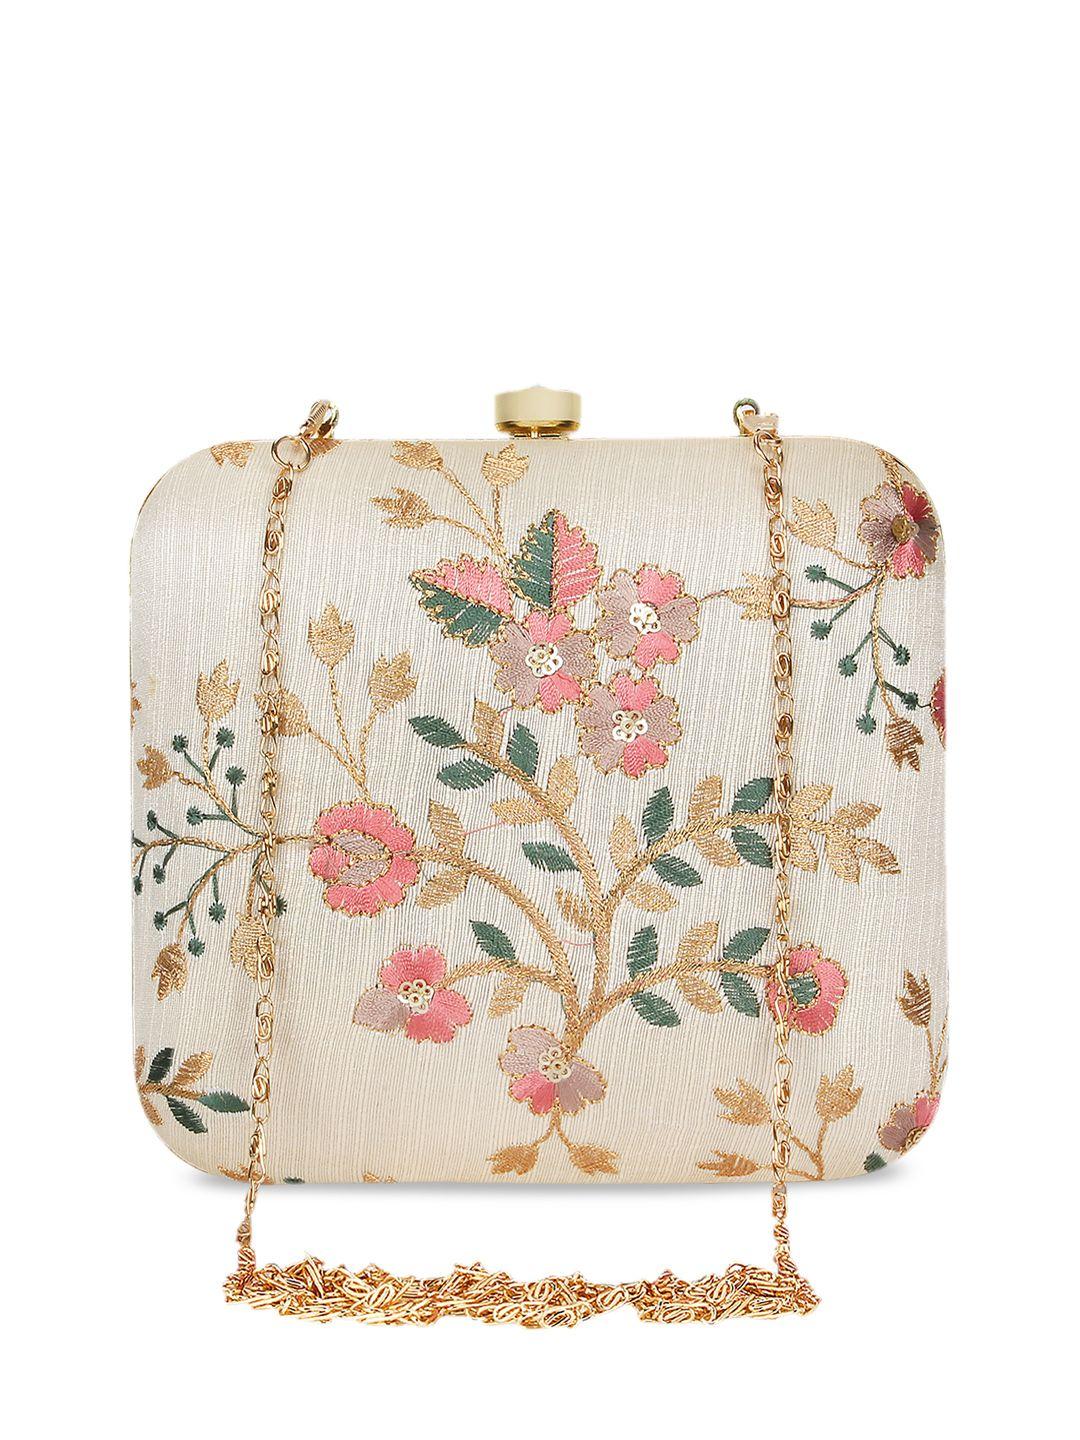 anekaant beige embroidered clutch